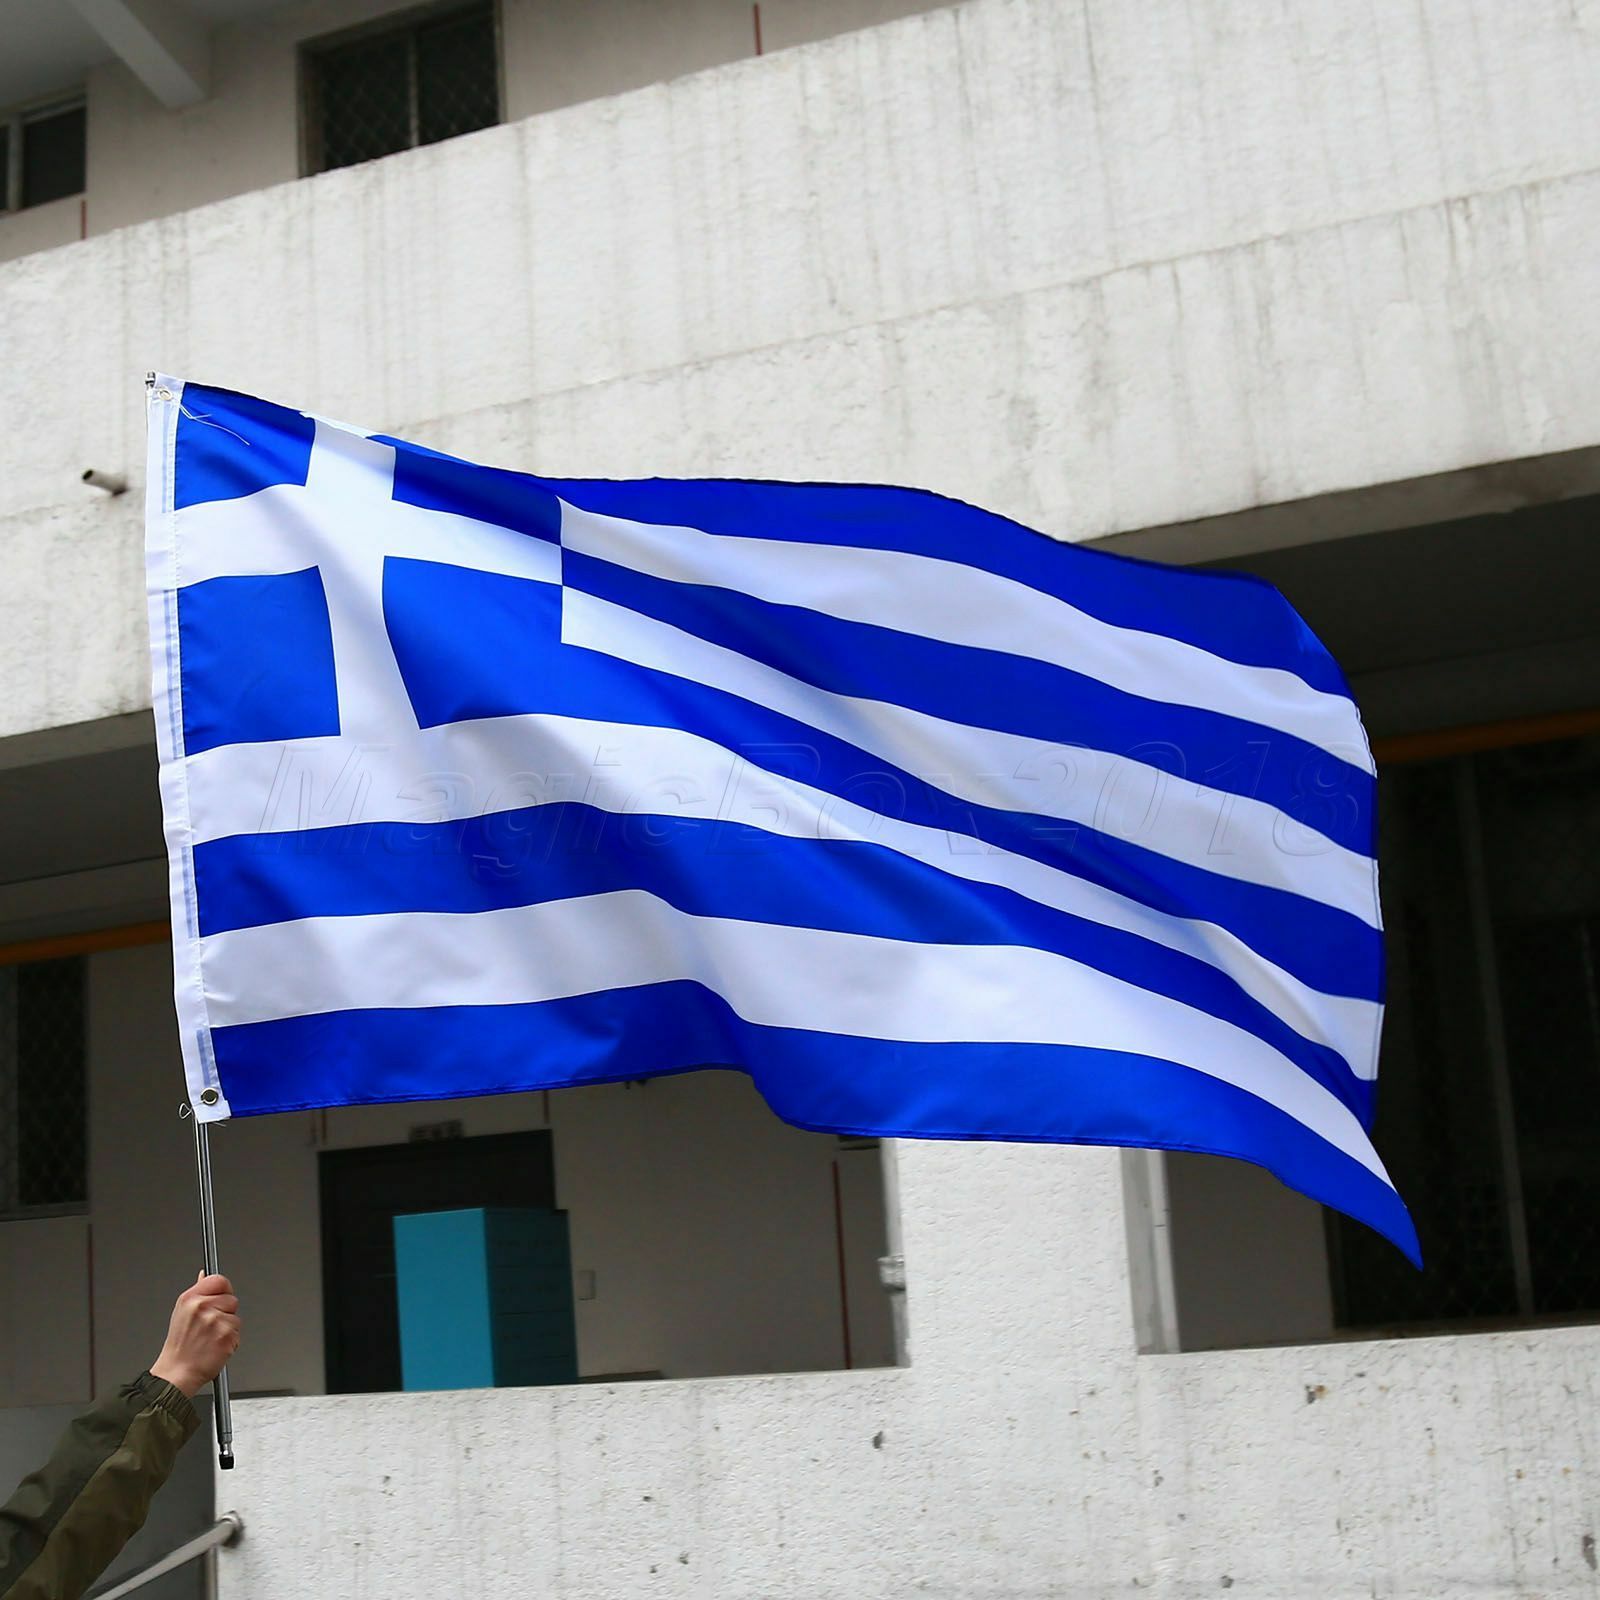 5' x 3' Large Greece Flag Greek National Flags Europe Banner ΣΗΜΑΊΑ ΤΗΣ ΕΛΛΆΔΑΣ